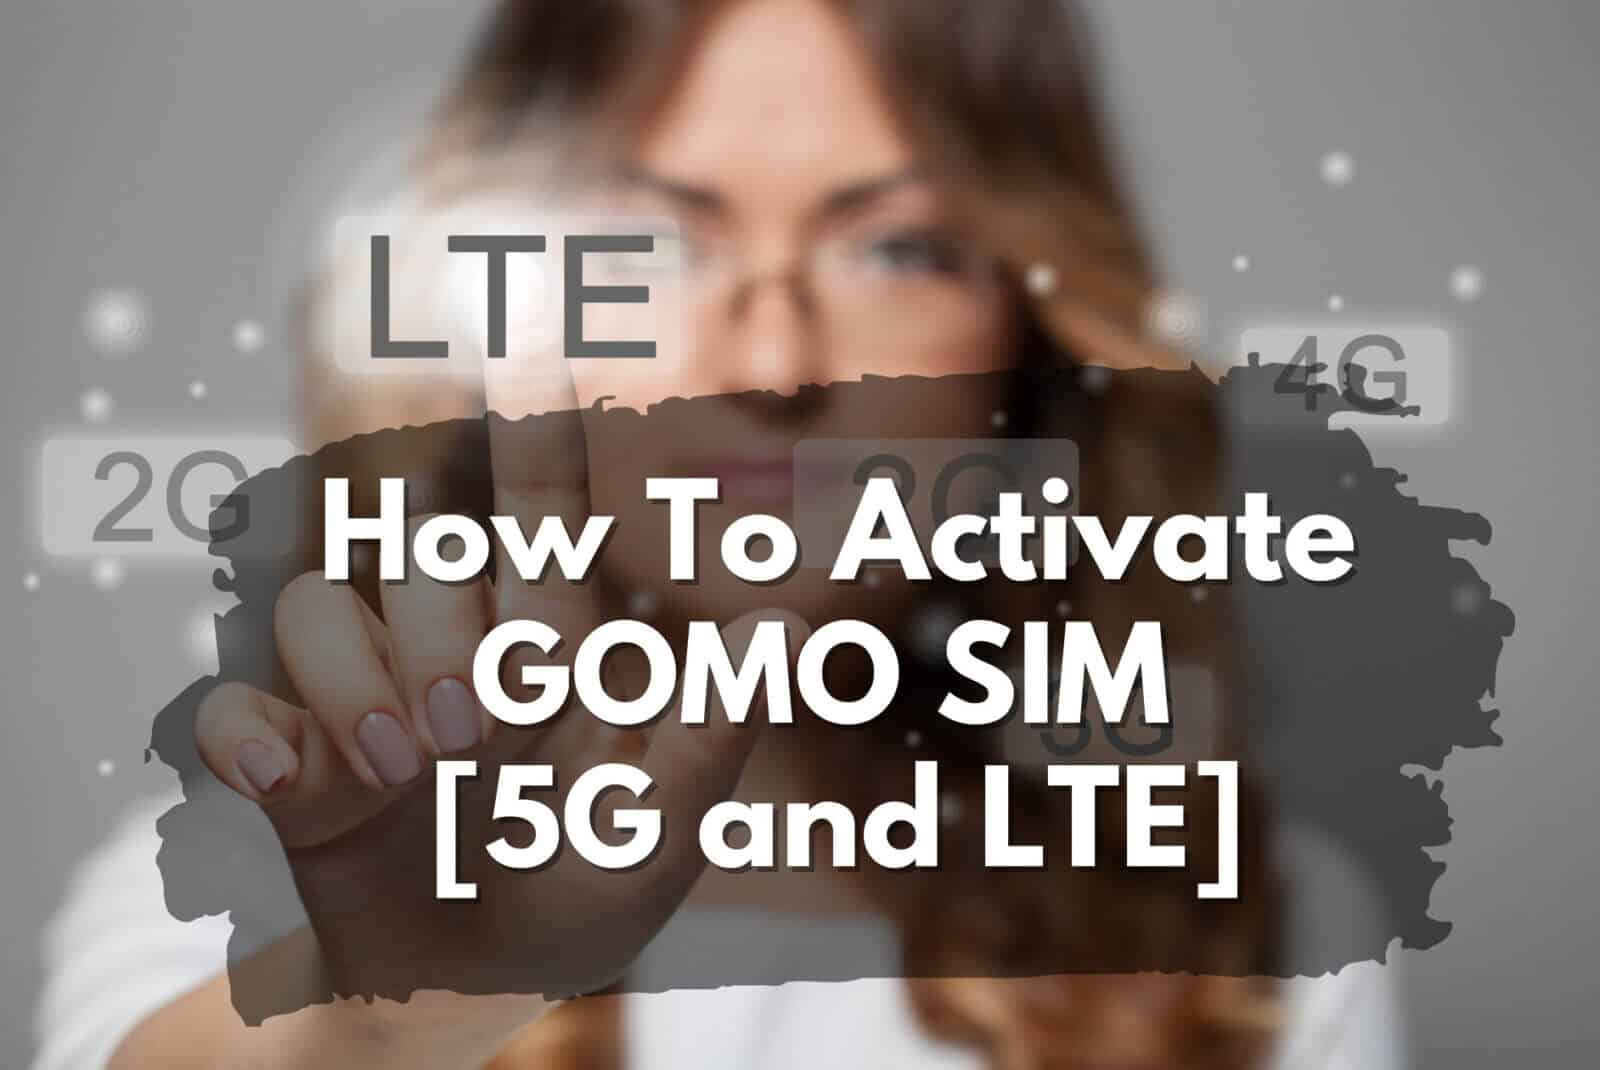 How to activate GOMO SIM for 5G and LTE connectivity.